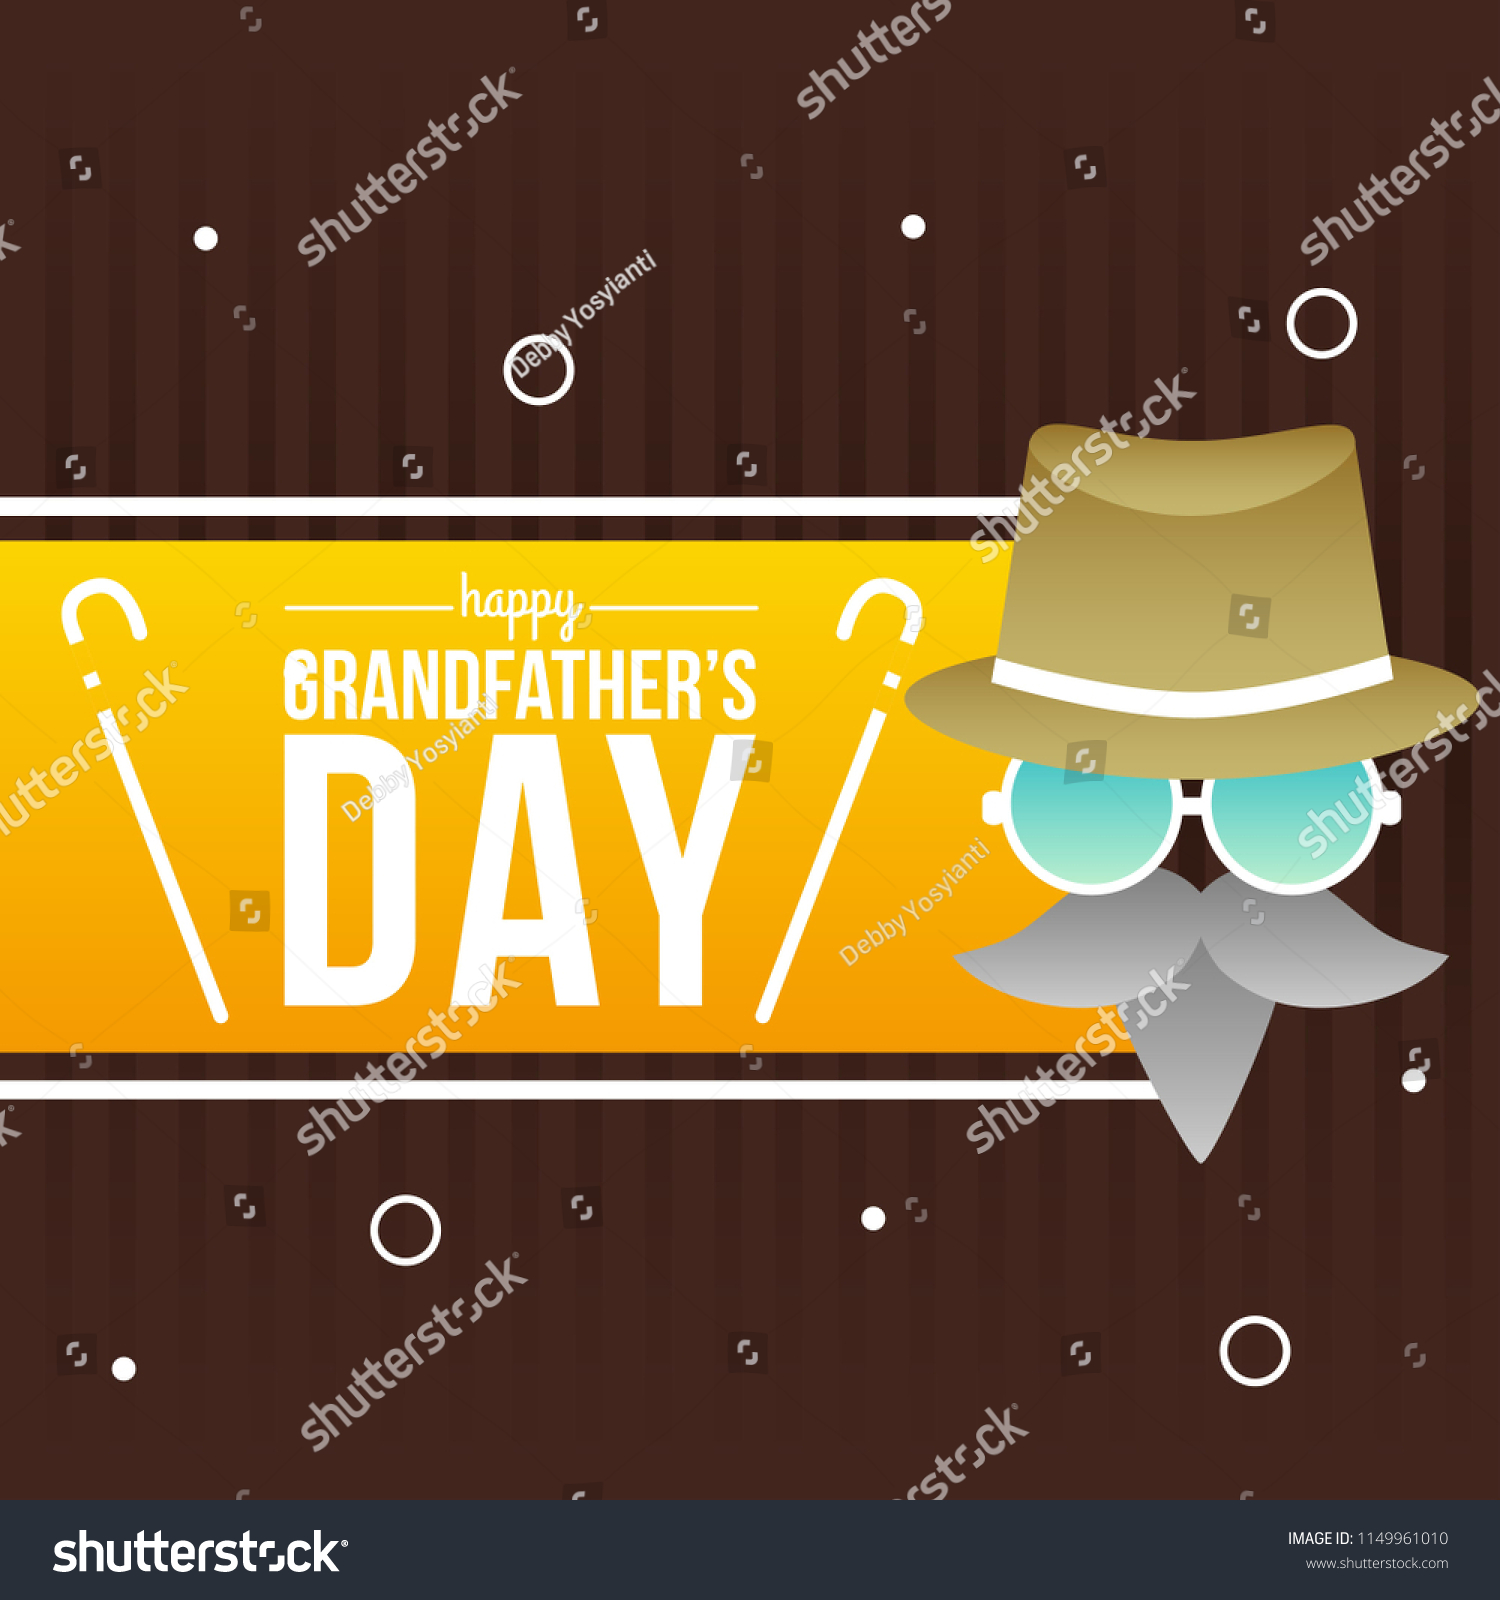 Grandfathers Day Illustration Stock Vector (Royalty Free) 1149961010